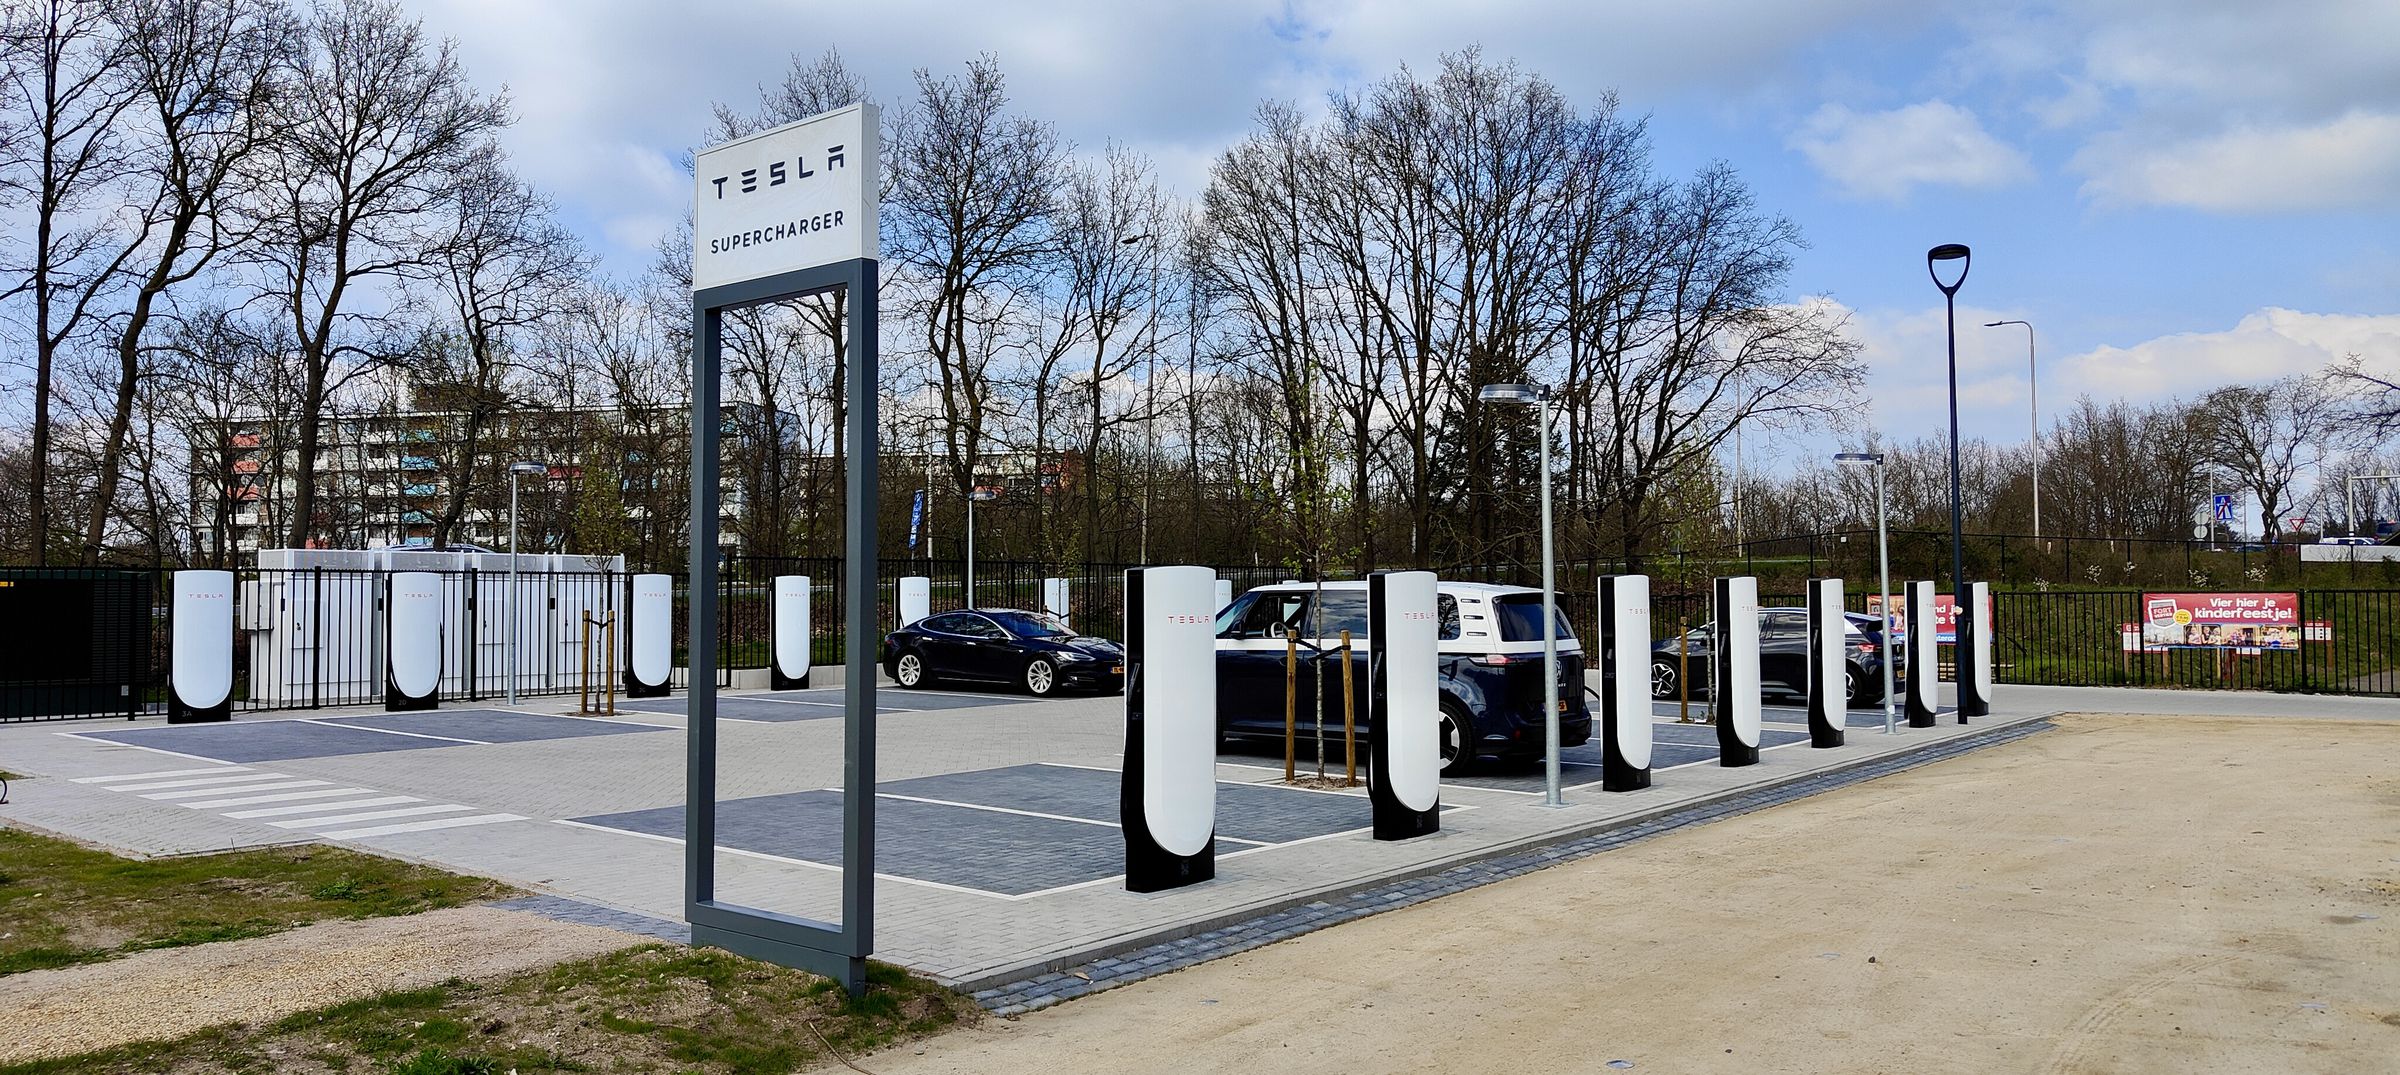 16 V4 Supercharger stalls just waiting for you in Harderwijk, the Netherlands, whether you own a Tesla or not.